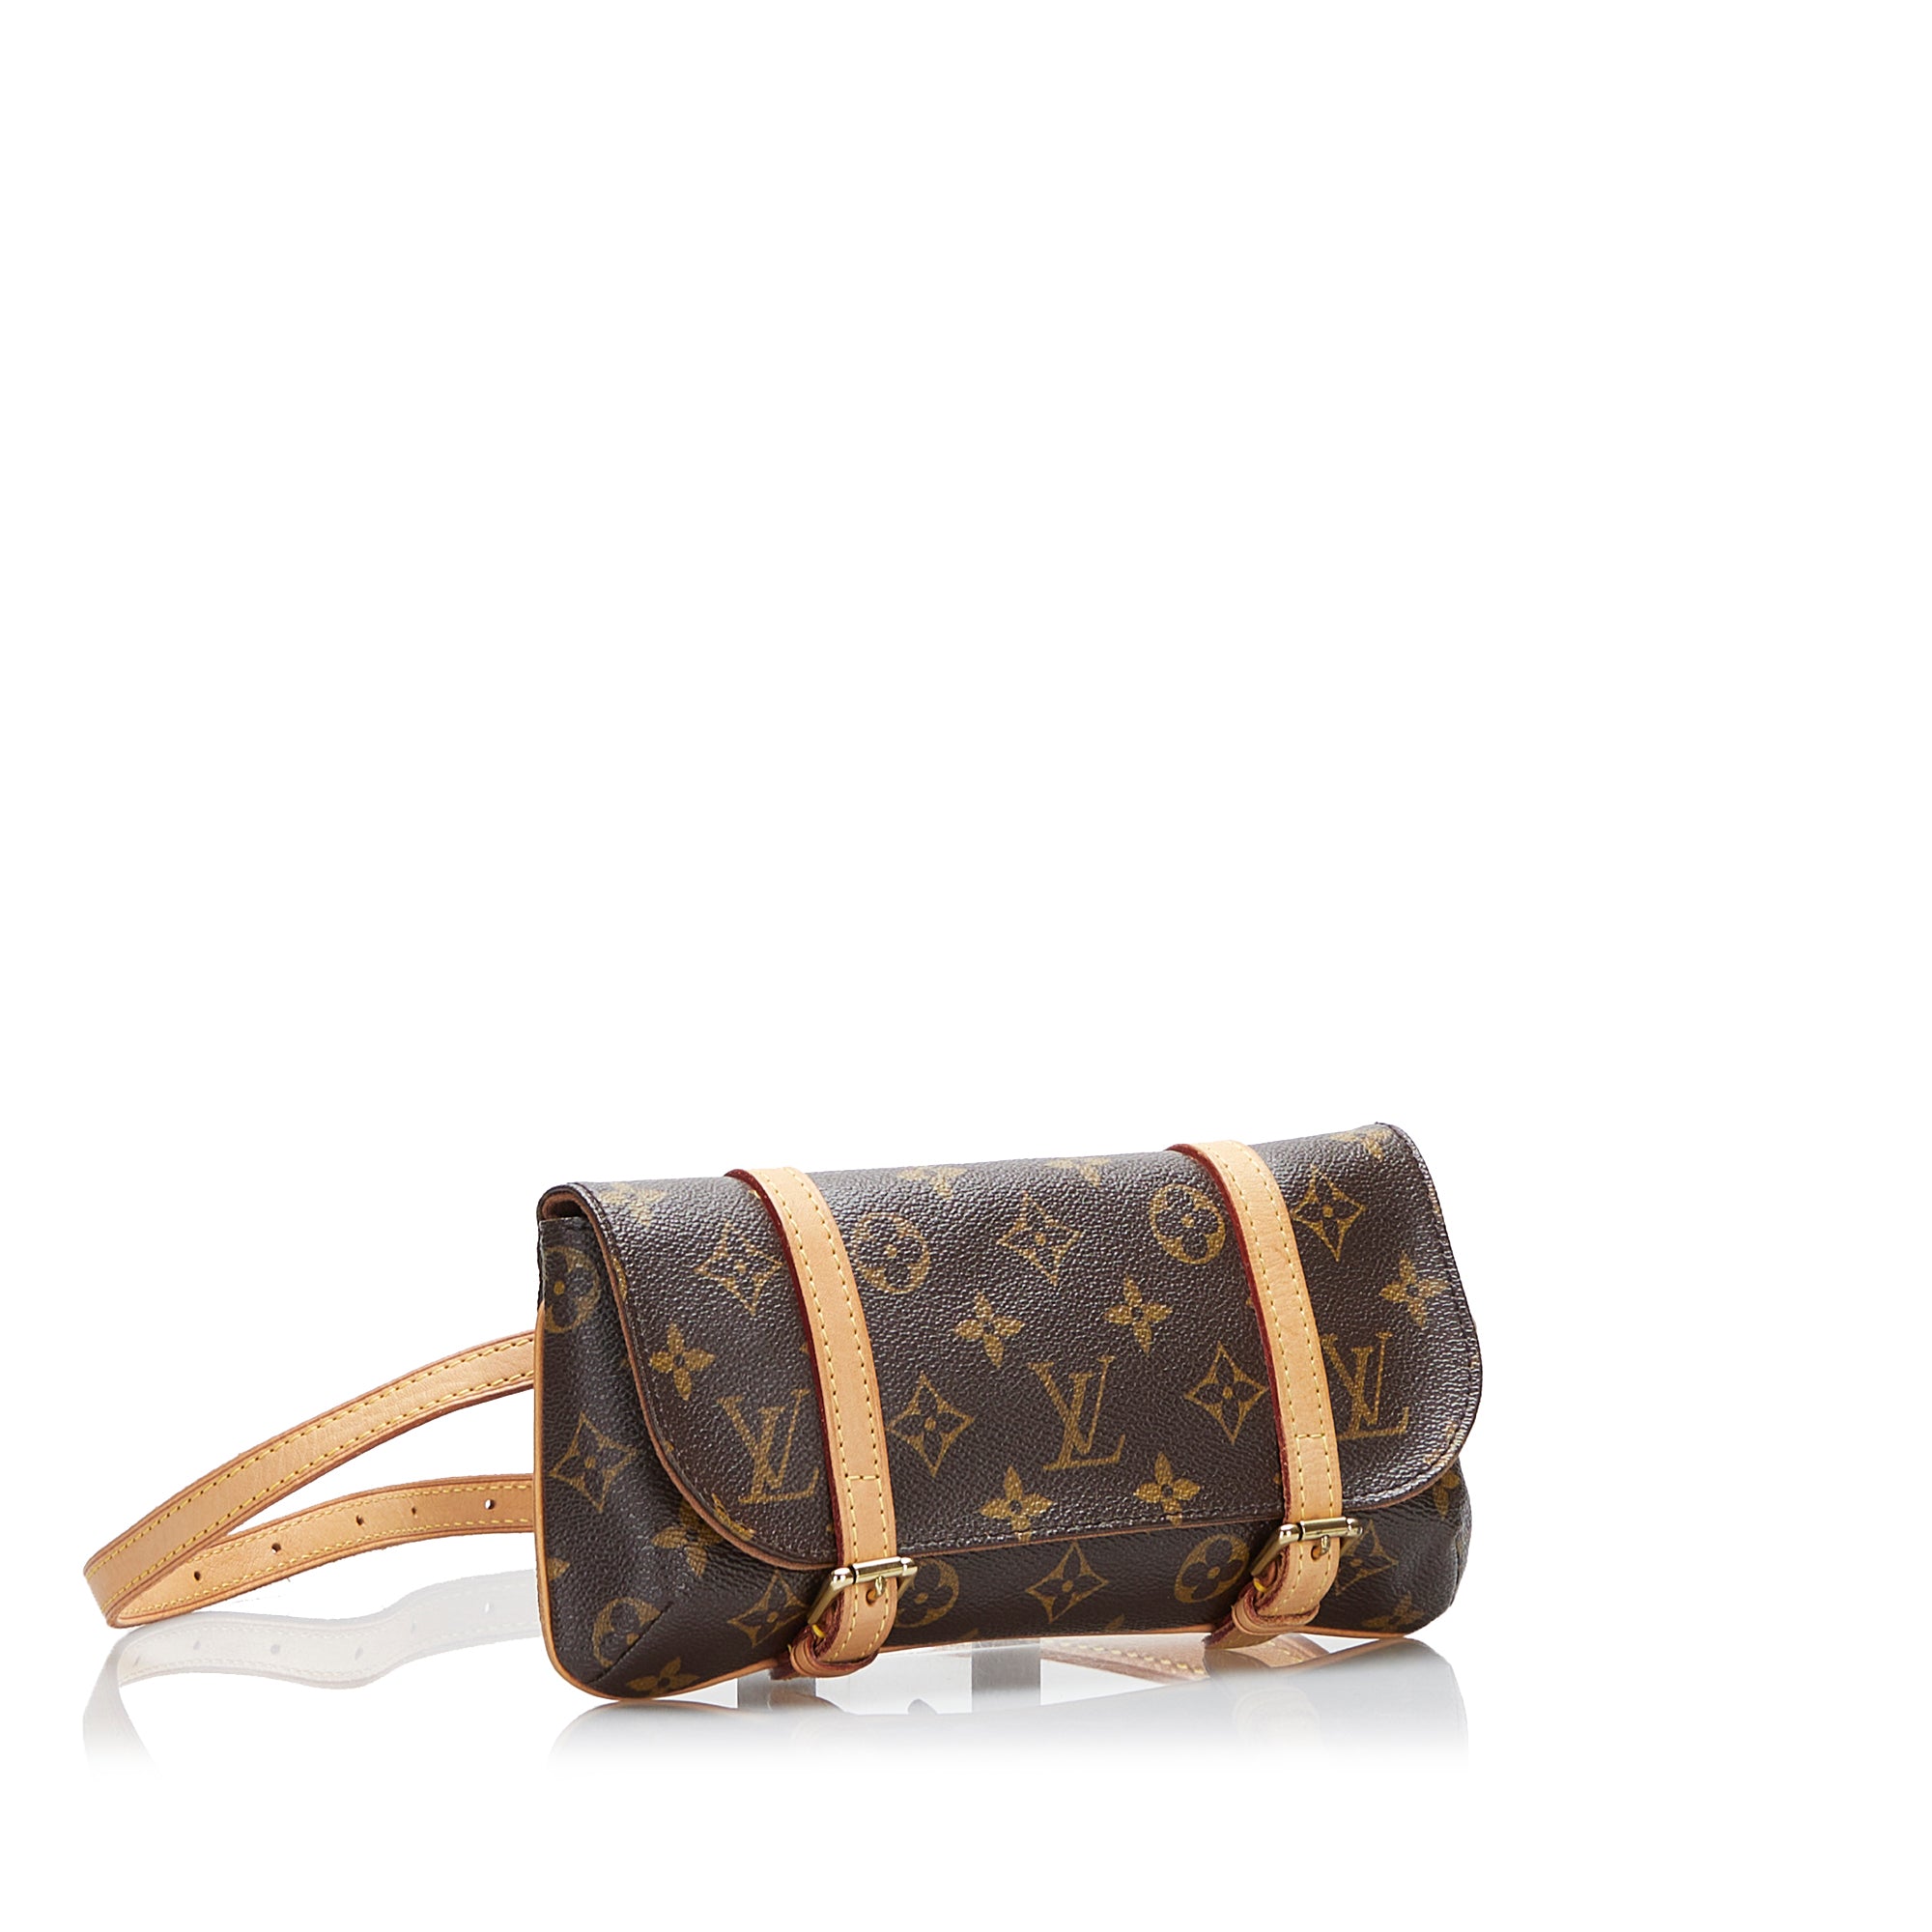 Louis Vuitton Marelle Belt Bag in Monogram Canvas and lEATHER